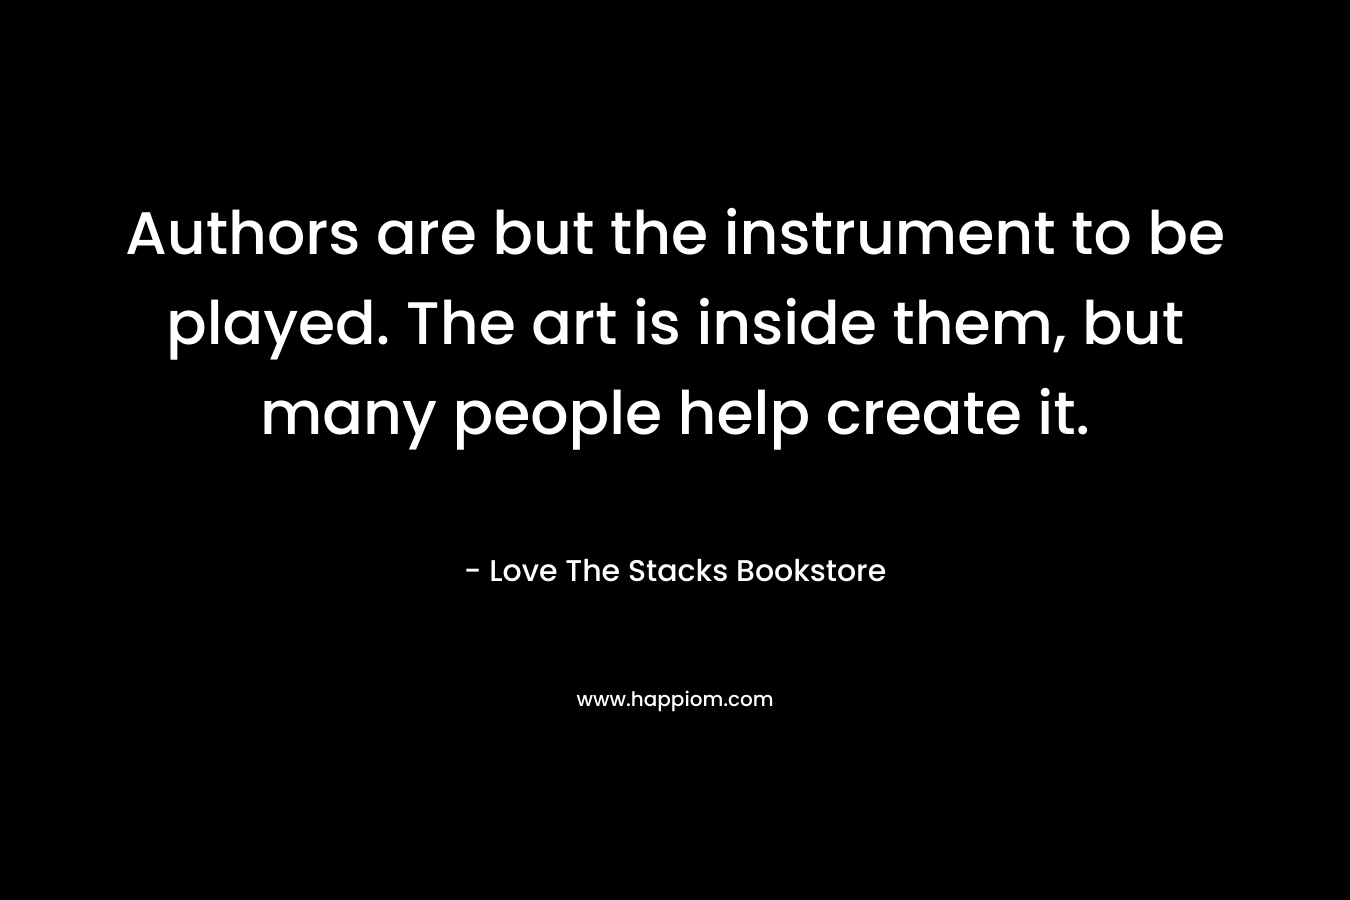 Authors are but the instrument to be played. The art is inside them, but many people help create it.